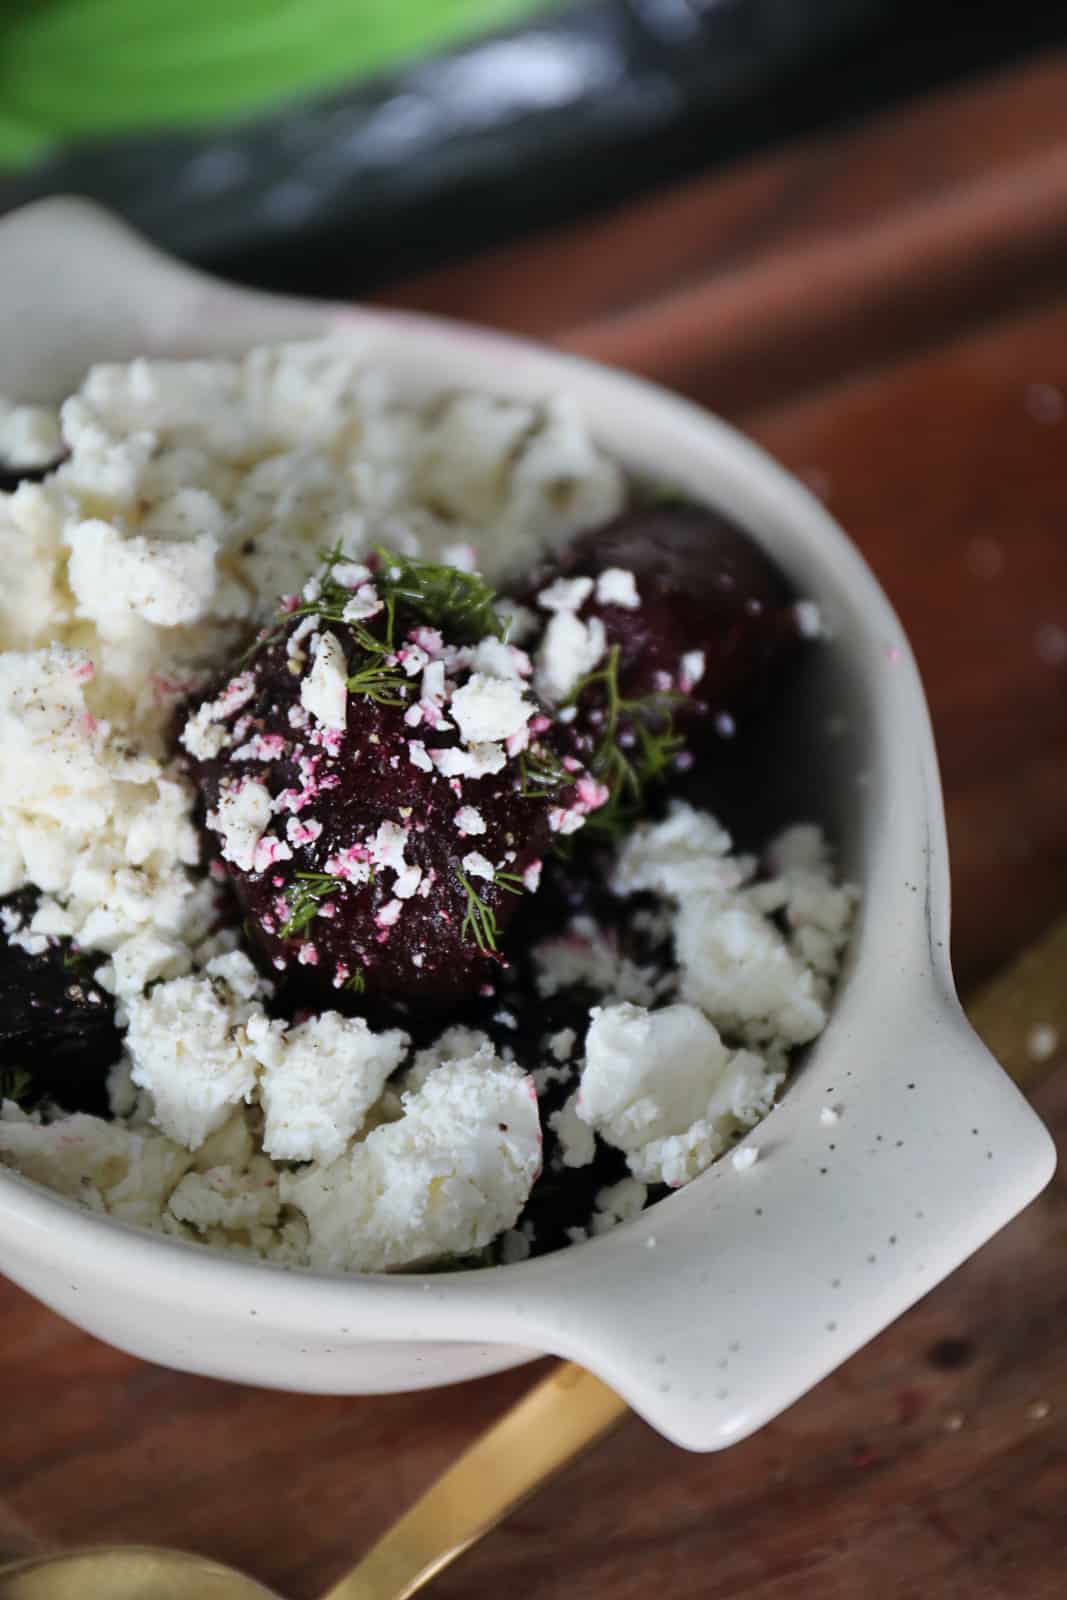 Traeger Side Salad with Smoked Beets and Feta